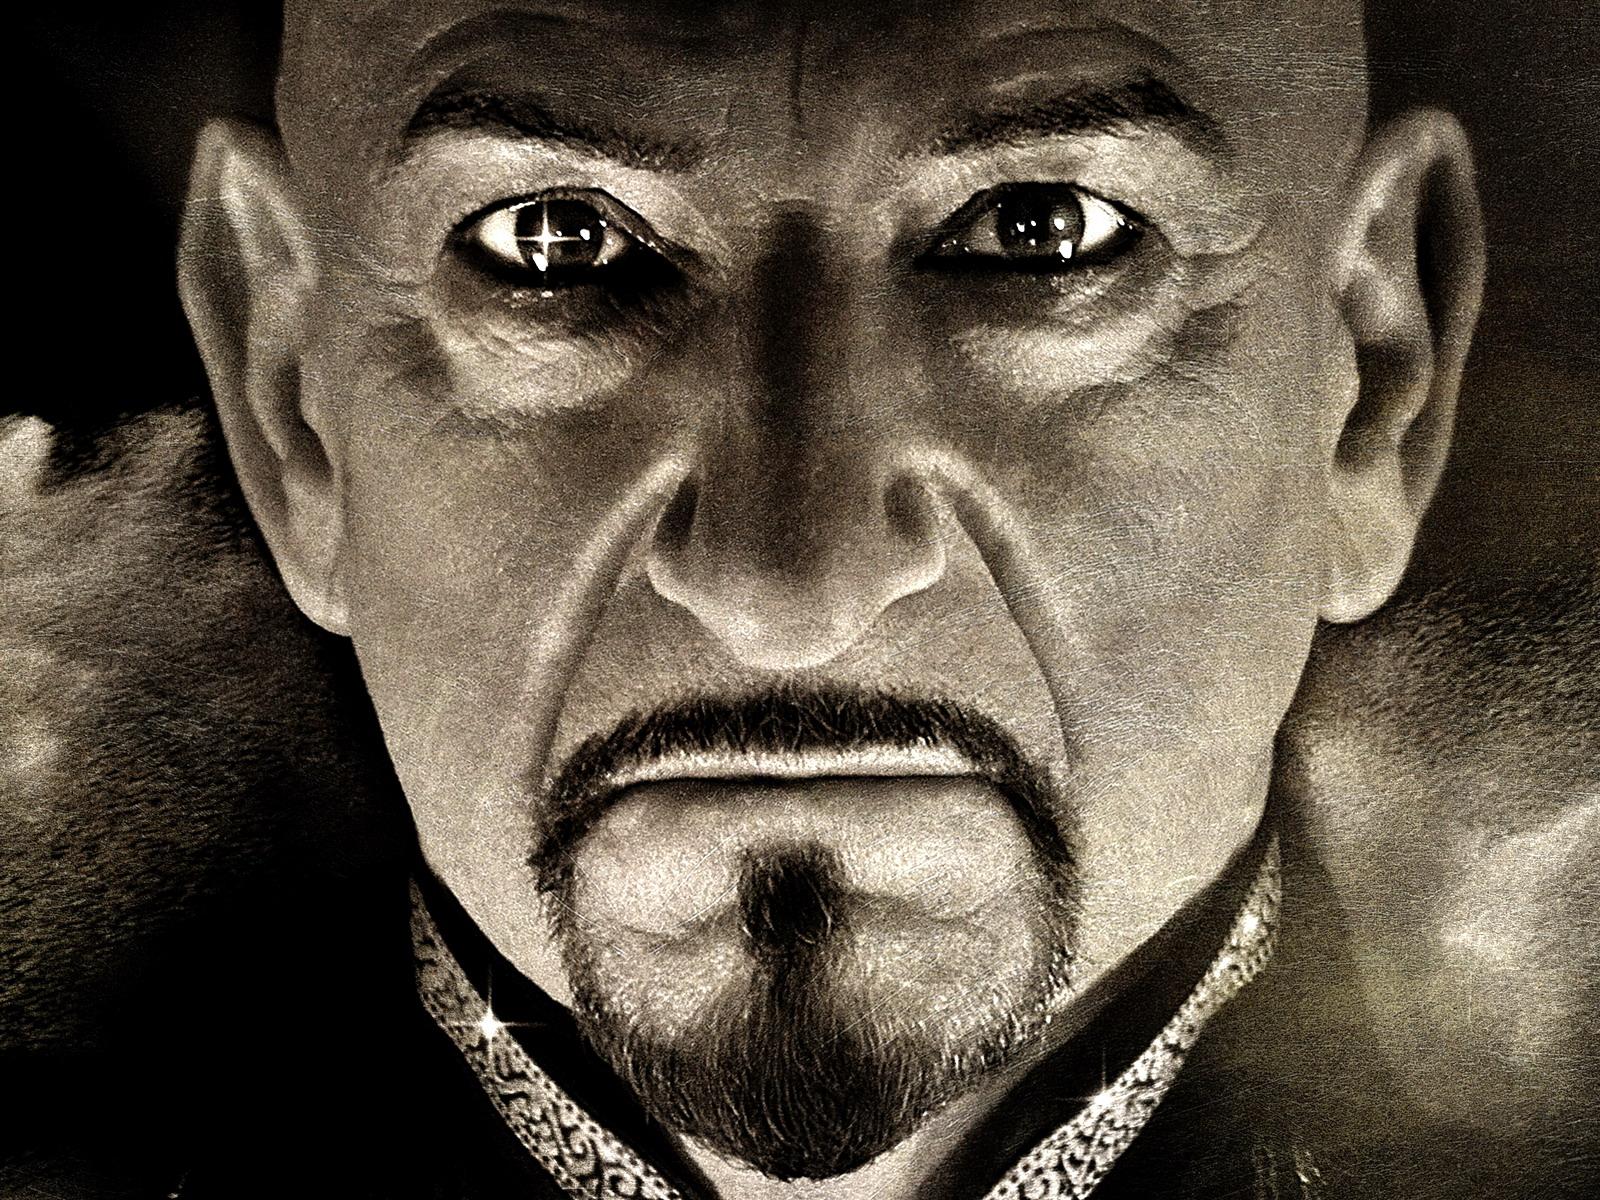 Ben Kingsley Prince of Persia The Sands of Time 3 wallpaper